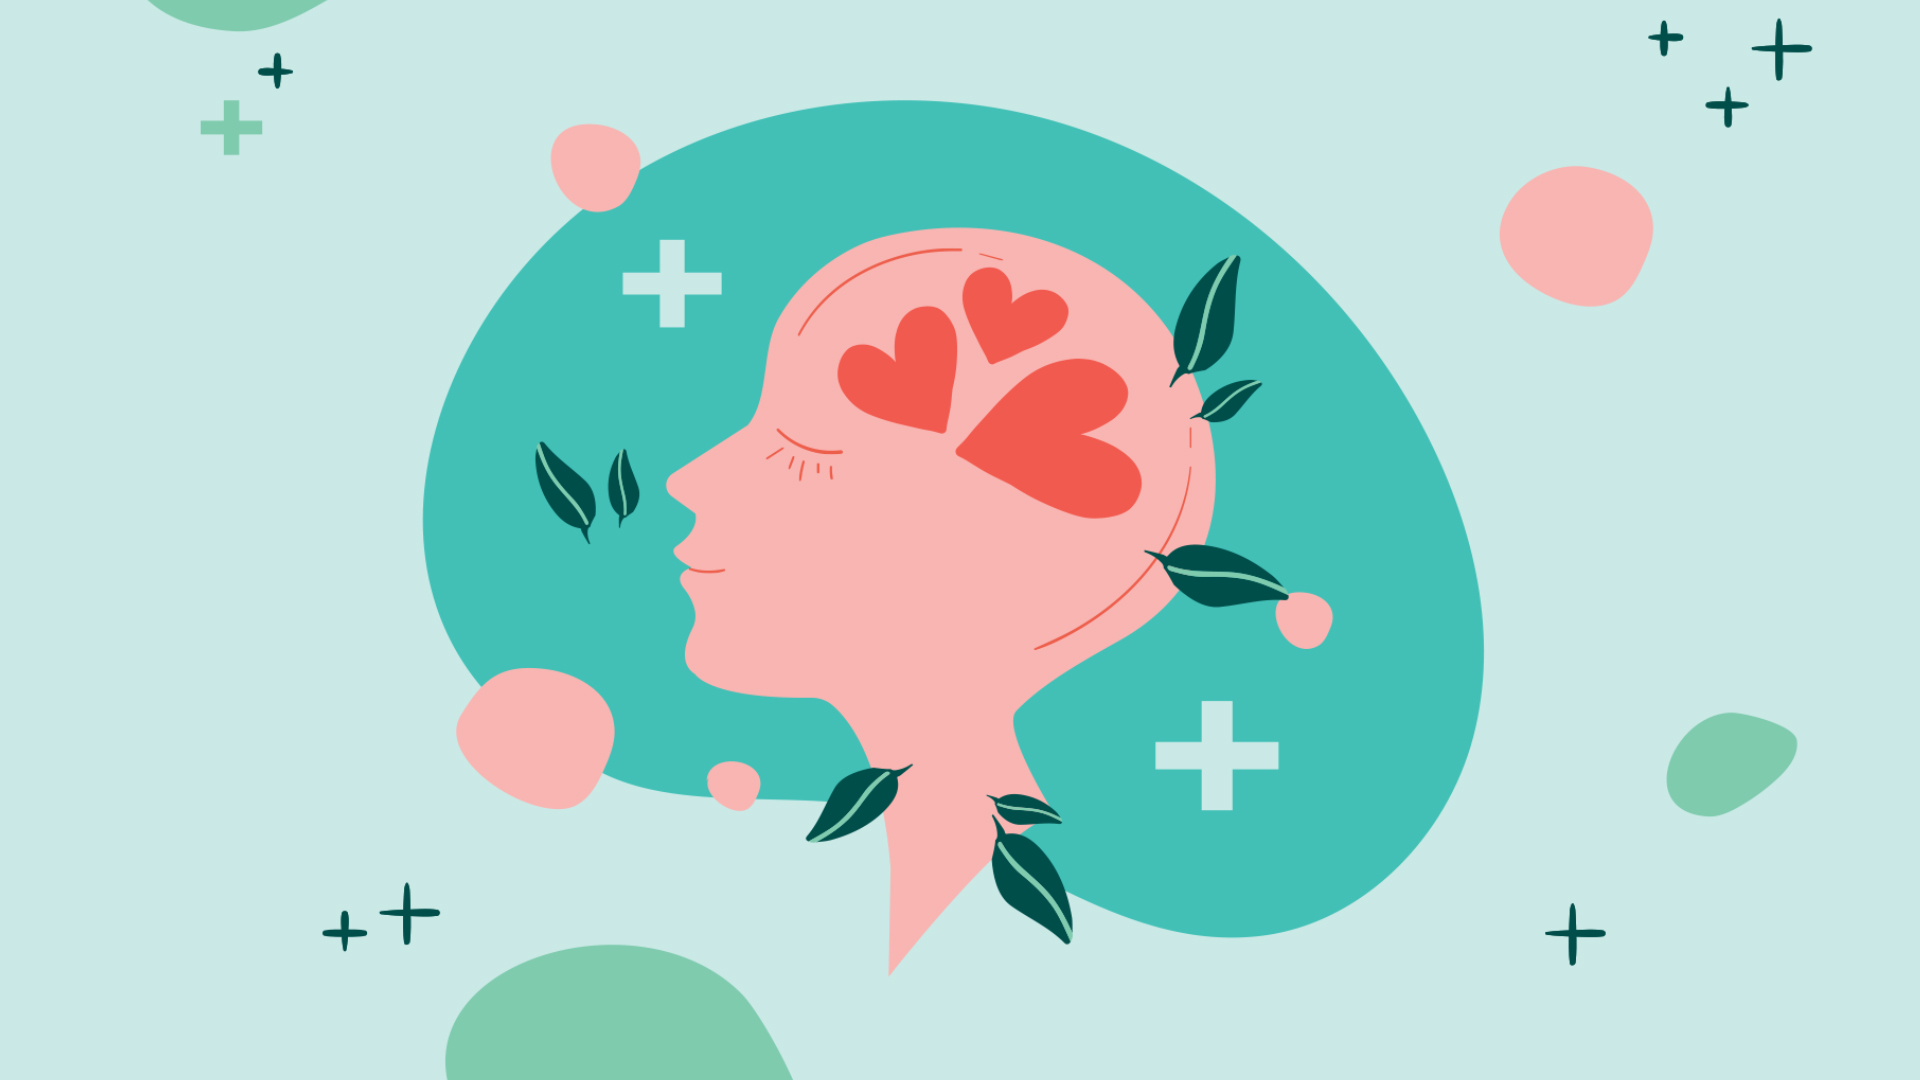 A cartoon depicting a head with hearts in it, which is the key visual of mental health month 2020.